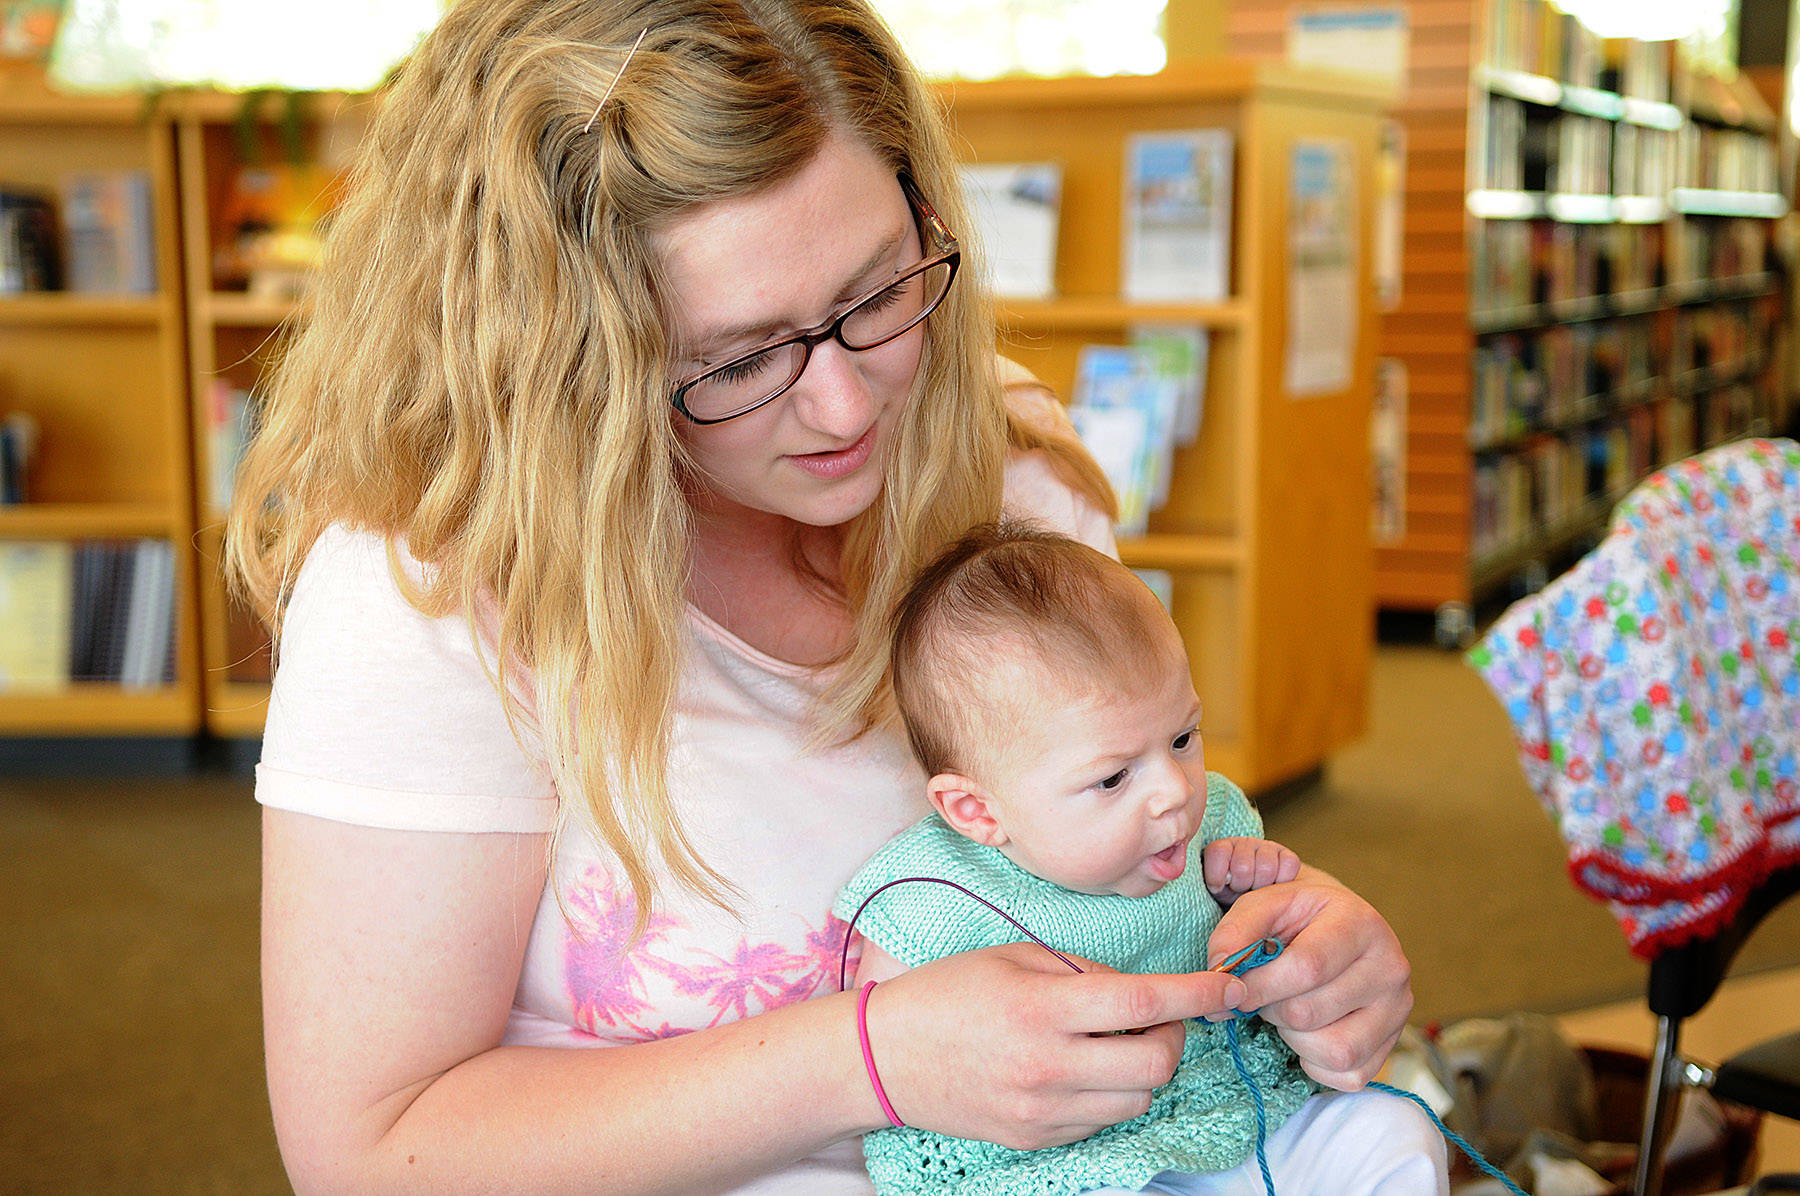 Karen Page knits at the Sardis Library while holding her daughter Rosalie during Worldwide Knit in Public Day on June 17, 2015 in Chilliwack. Saturday, June 12, 2021 is Worldwide Knit in Public Day. (Jenna Hauck/ Chilliwack Progress file)